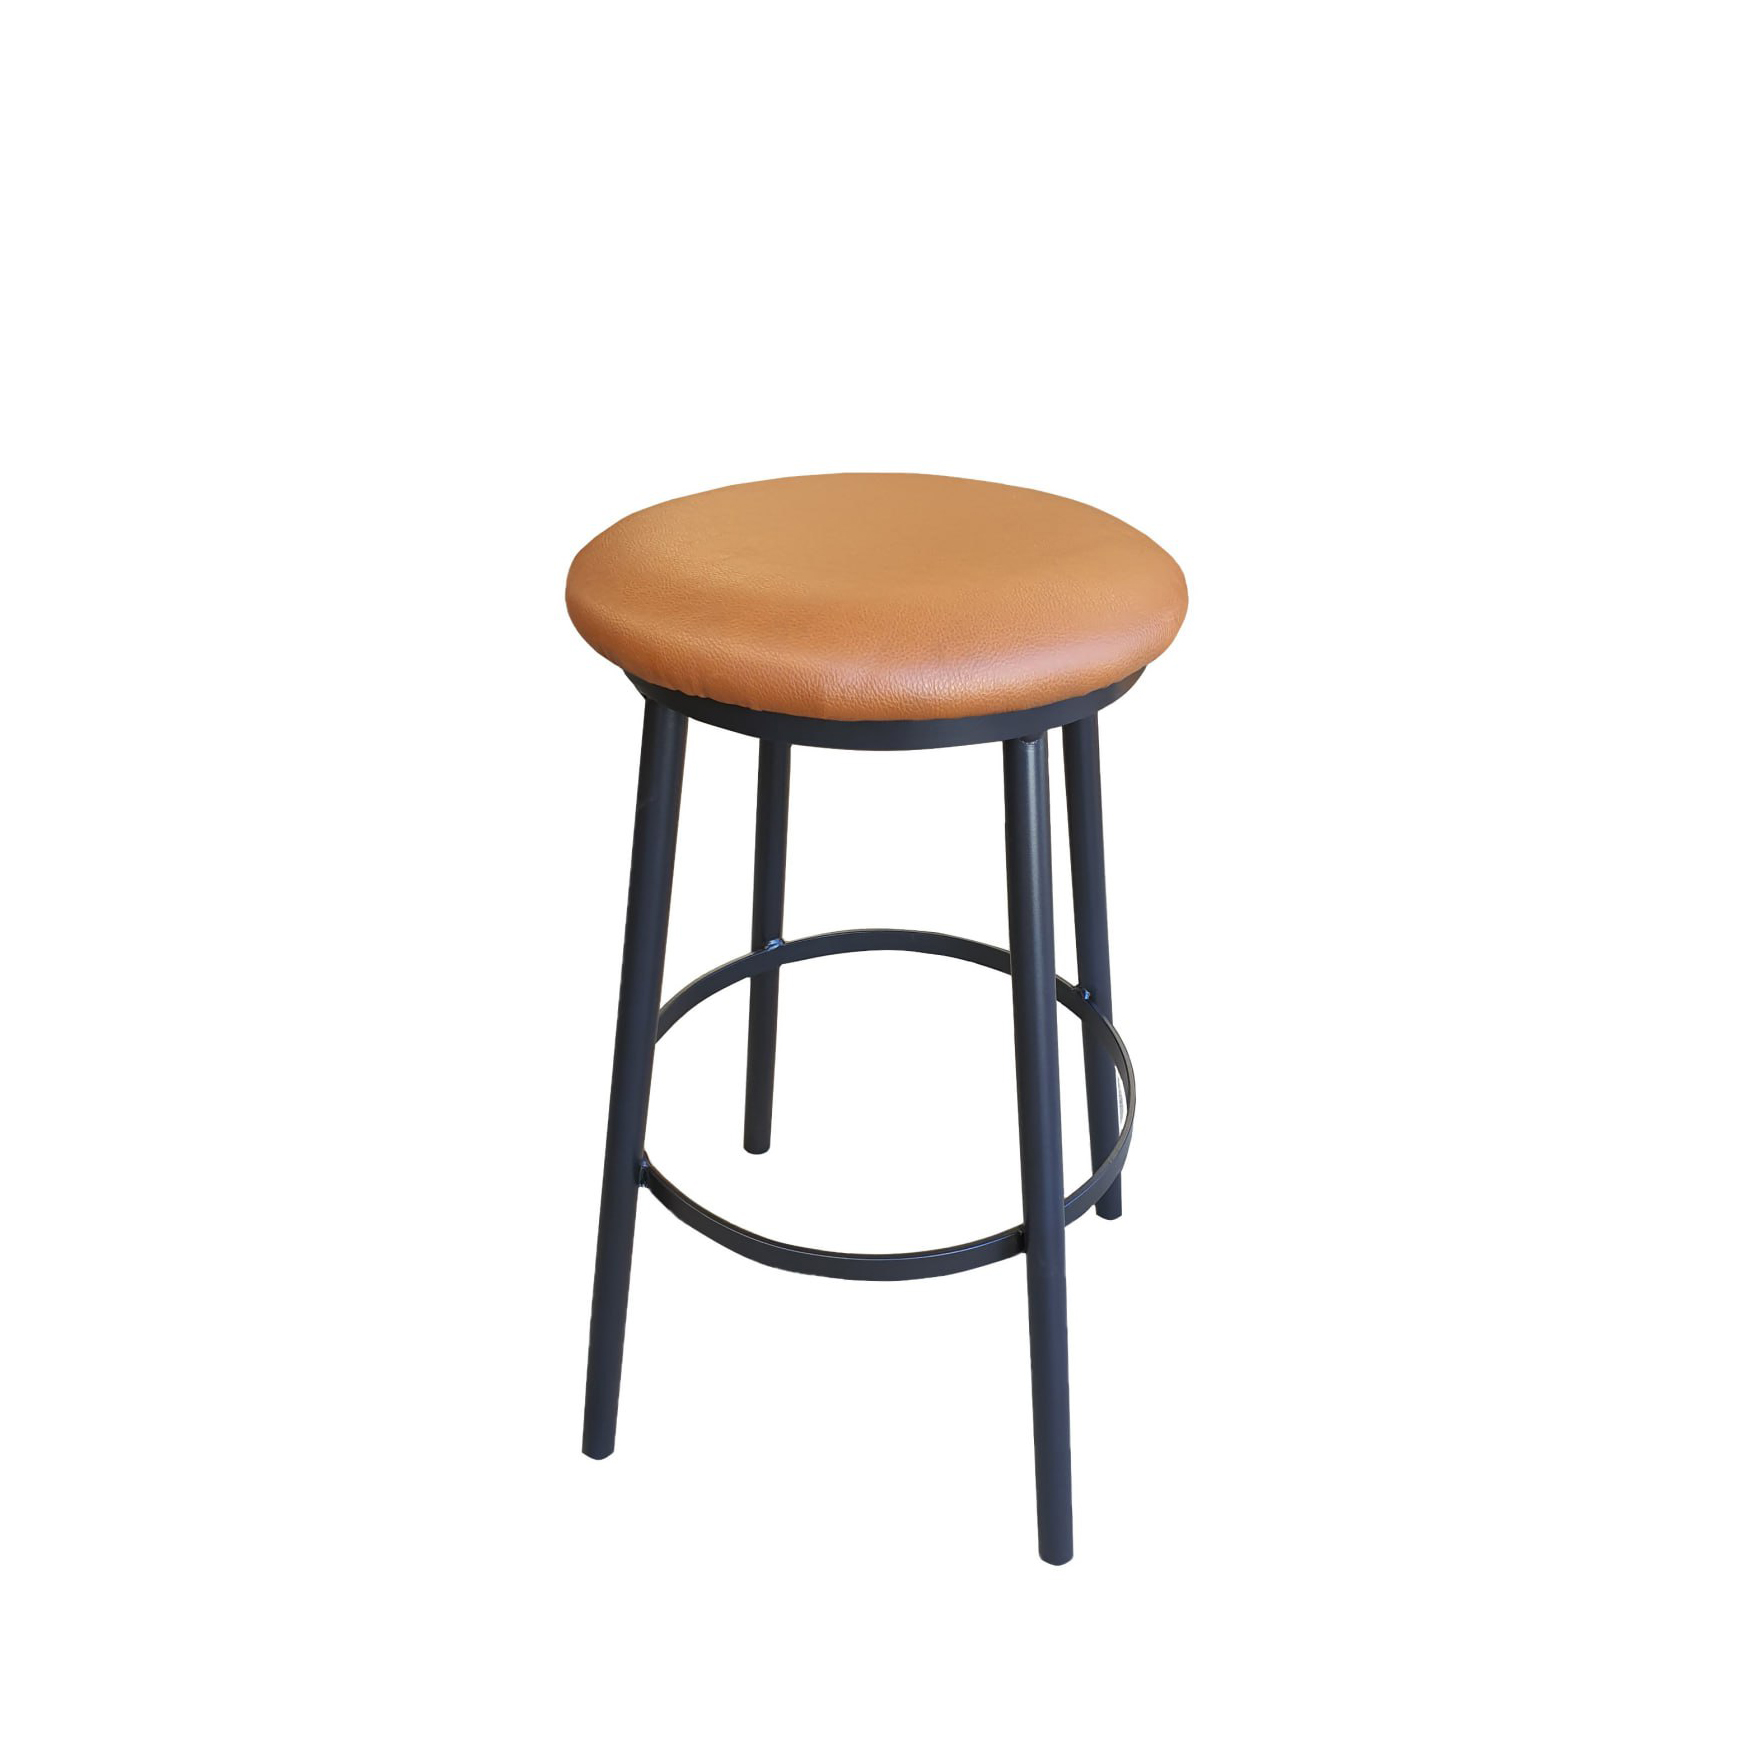 Deck Round Stool Powder Coated with Vinyl Light Brown Upholstery and Foot Support